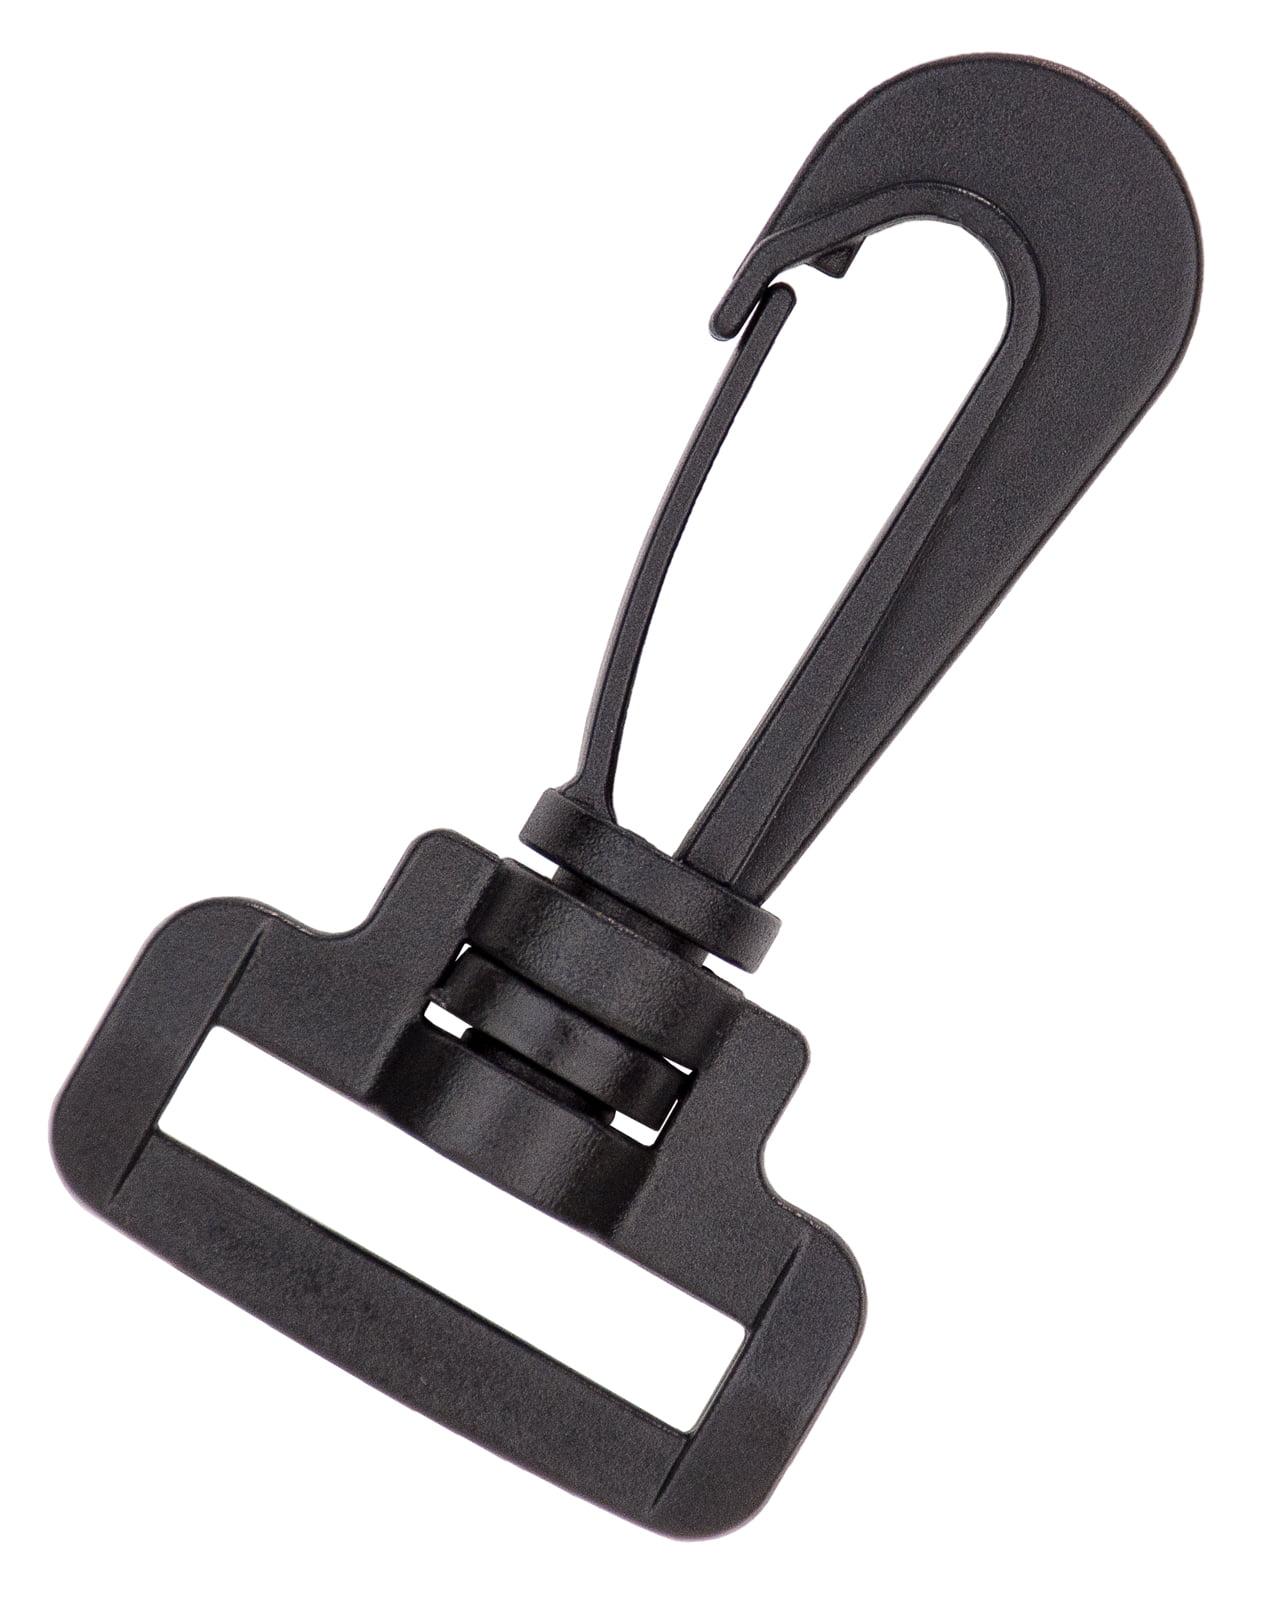 Details about   Jumbo 5 1/2" Aluminum Hook With Spring Loaded Snap and Cushion Grip 